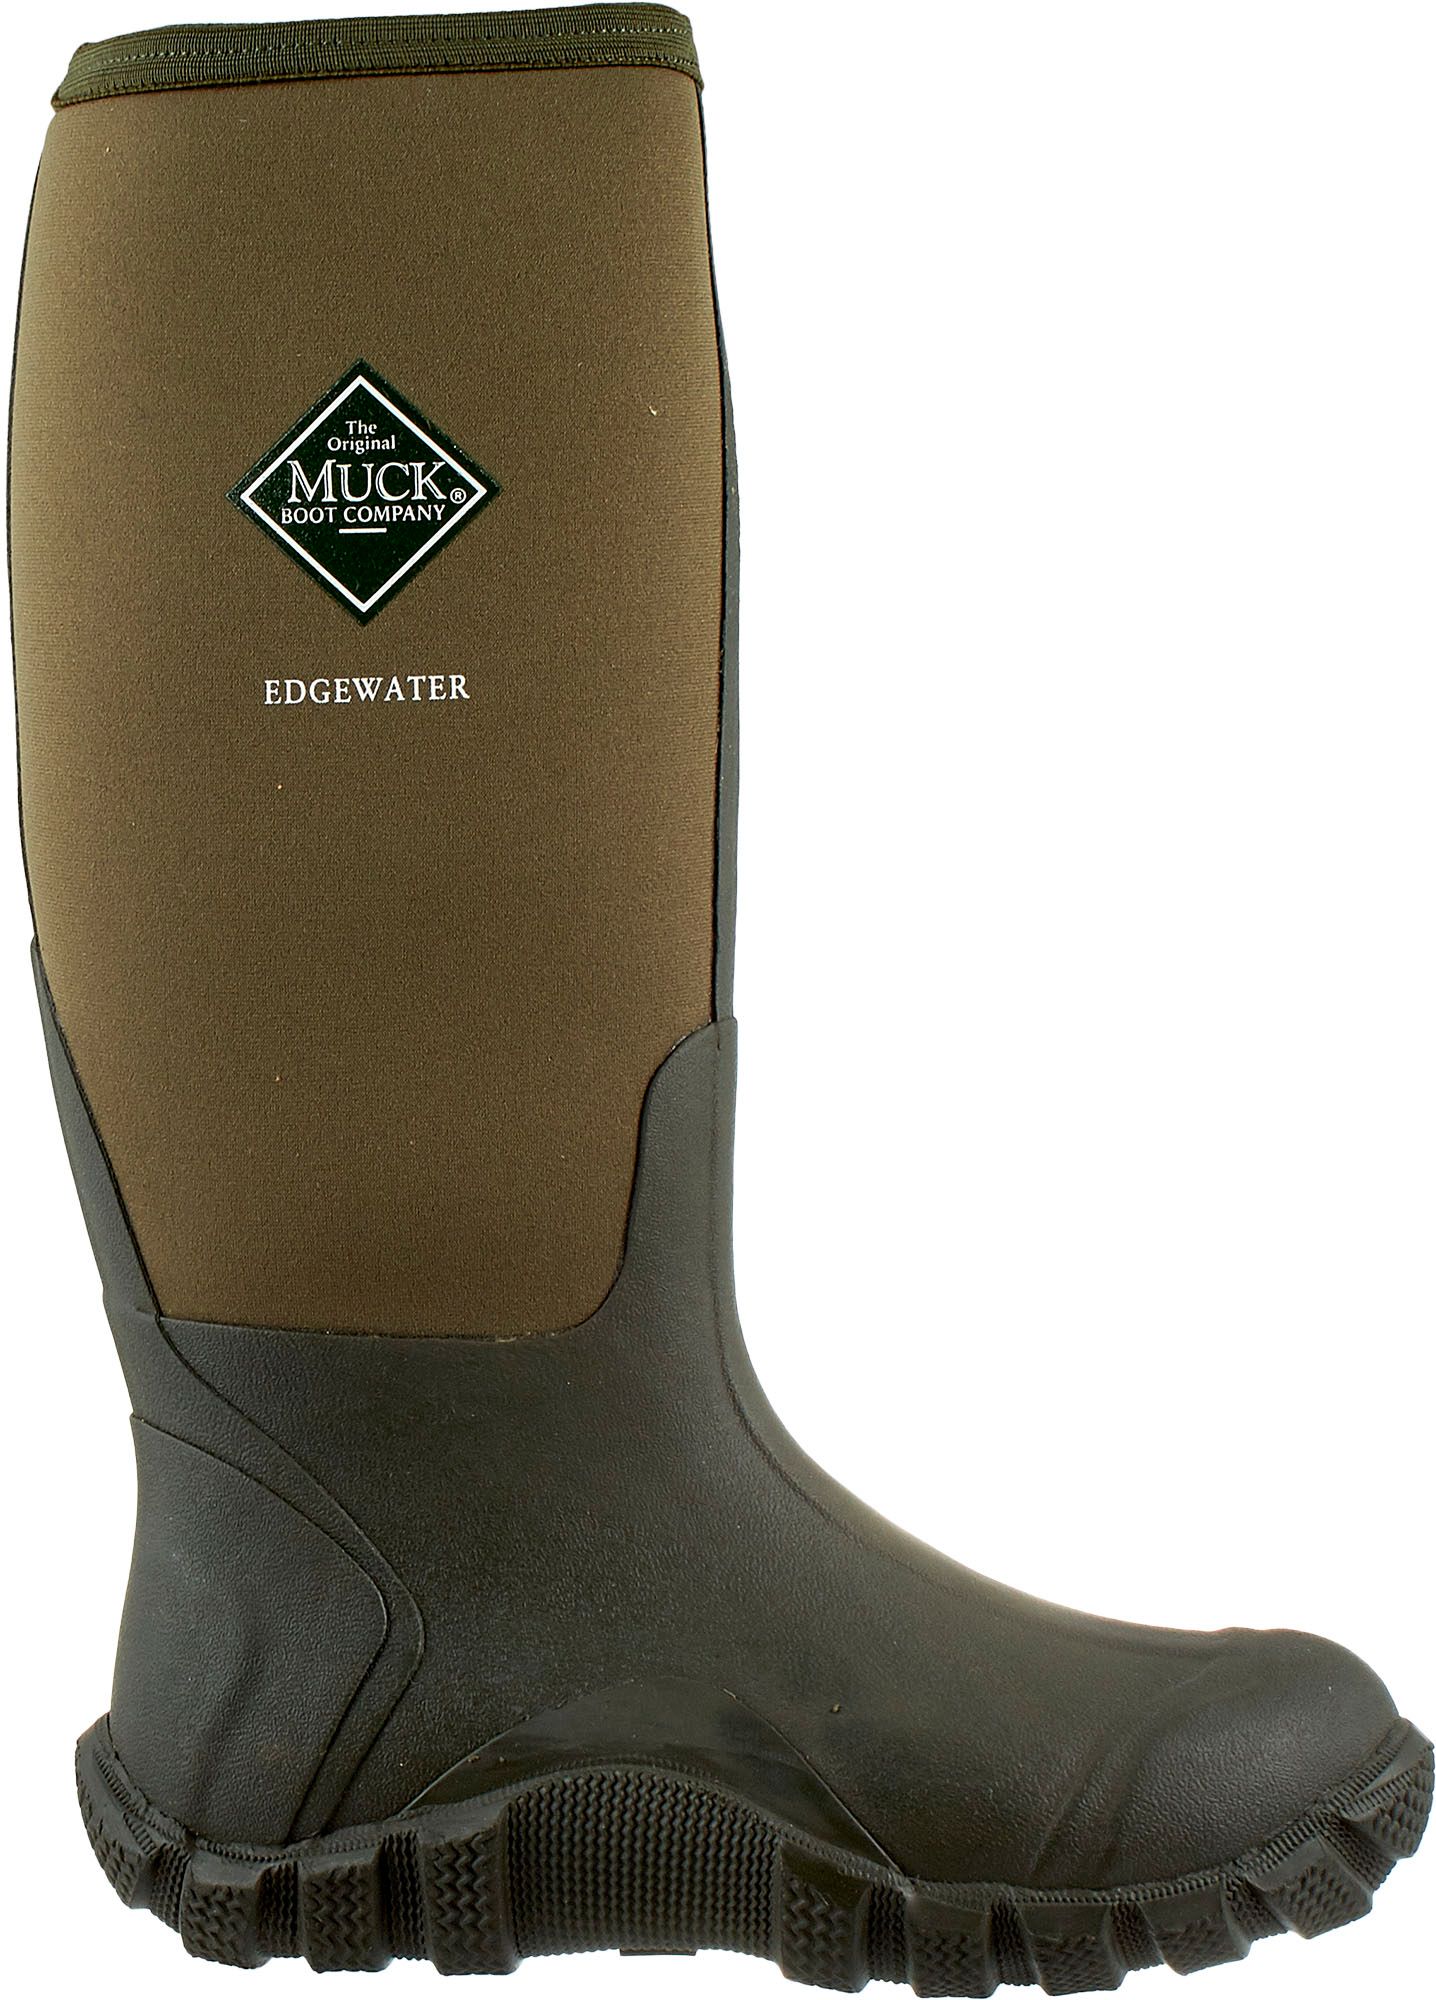 muck boots sale clearance